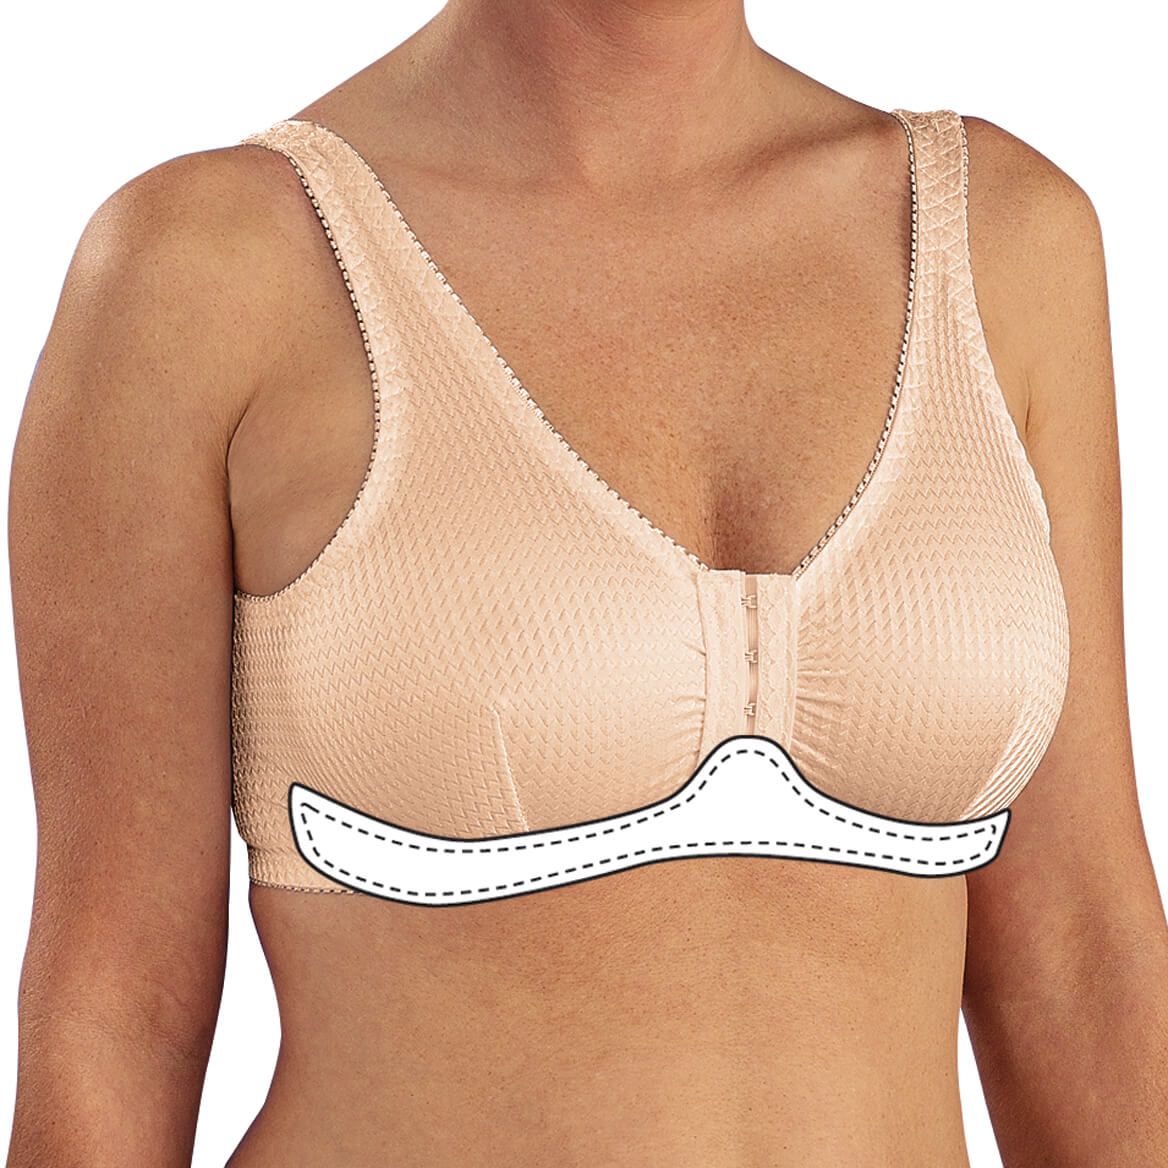 Reusable Cotton Bra Liners for Sweat Absorption